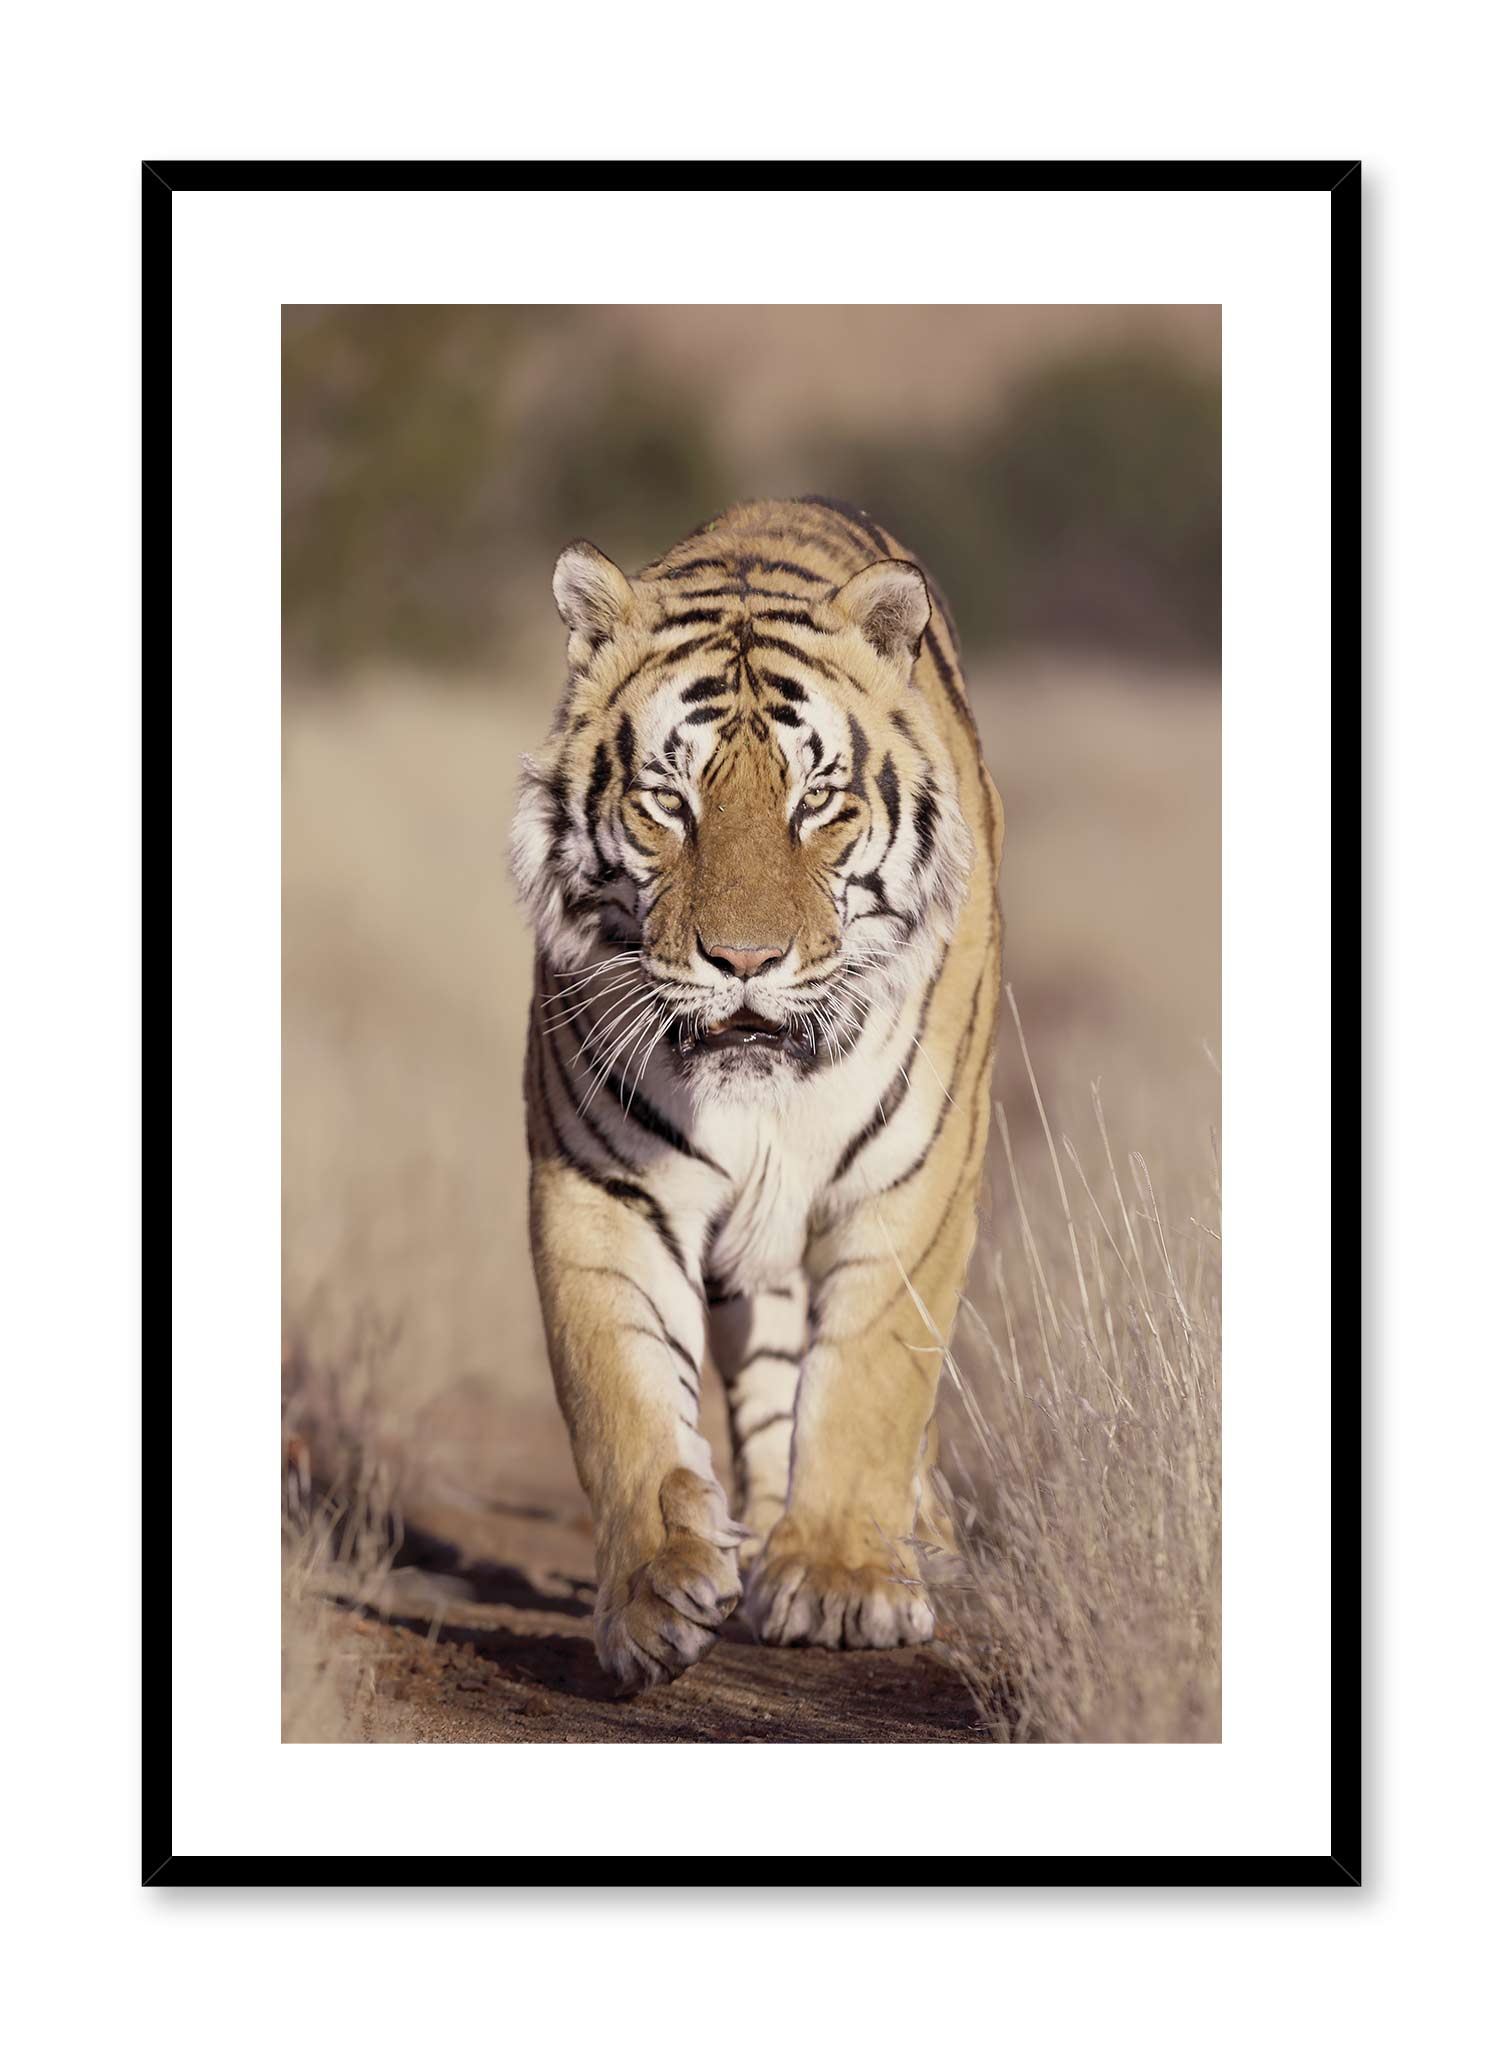 On the Prowl is a minimalist photography of a mighty tiger staring right at the observer as if it is ready to pounce by Opposite Wall.